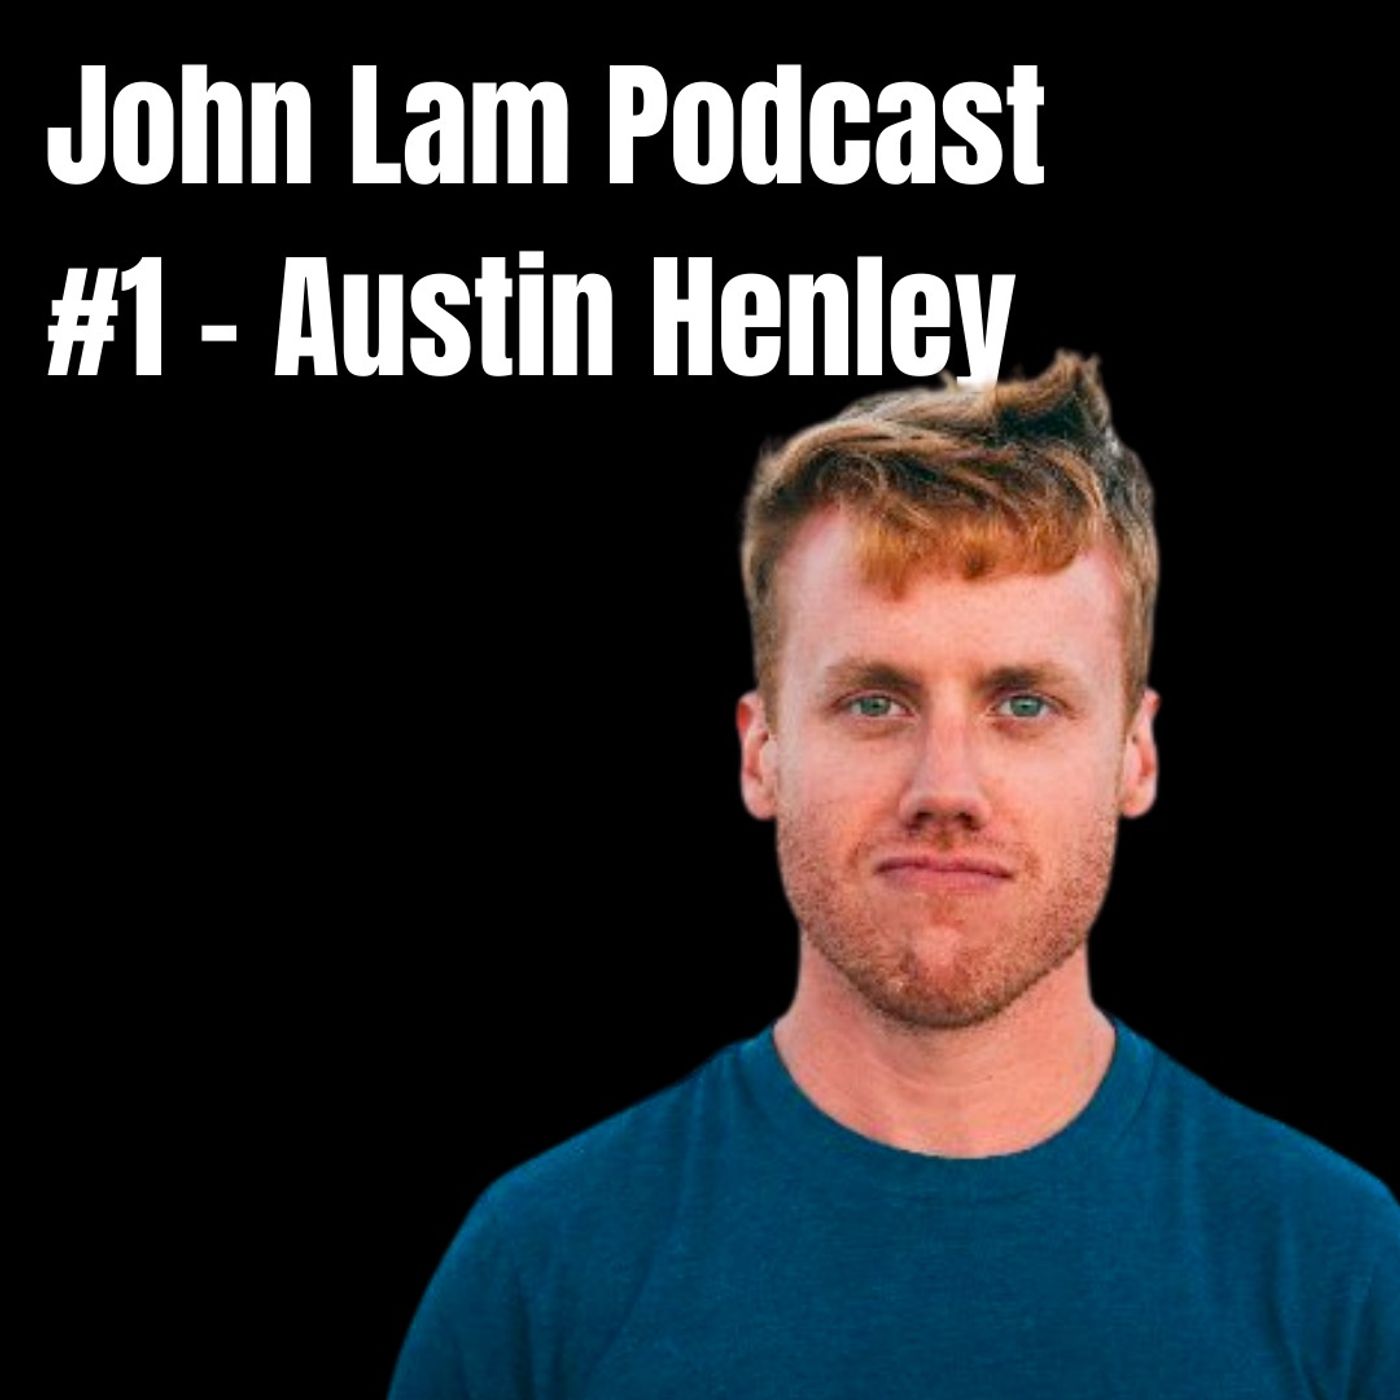 Ep.1 Austin Henley: on moving from a professorship at Tennessee to Microsoft, open problems in developer tools research, and bouldering to strengthen the mind and body